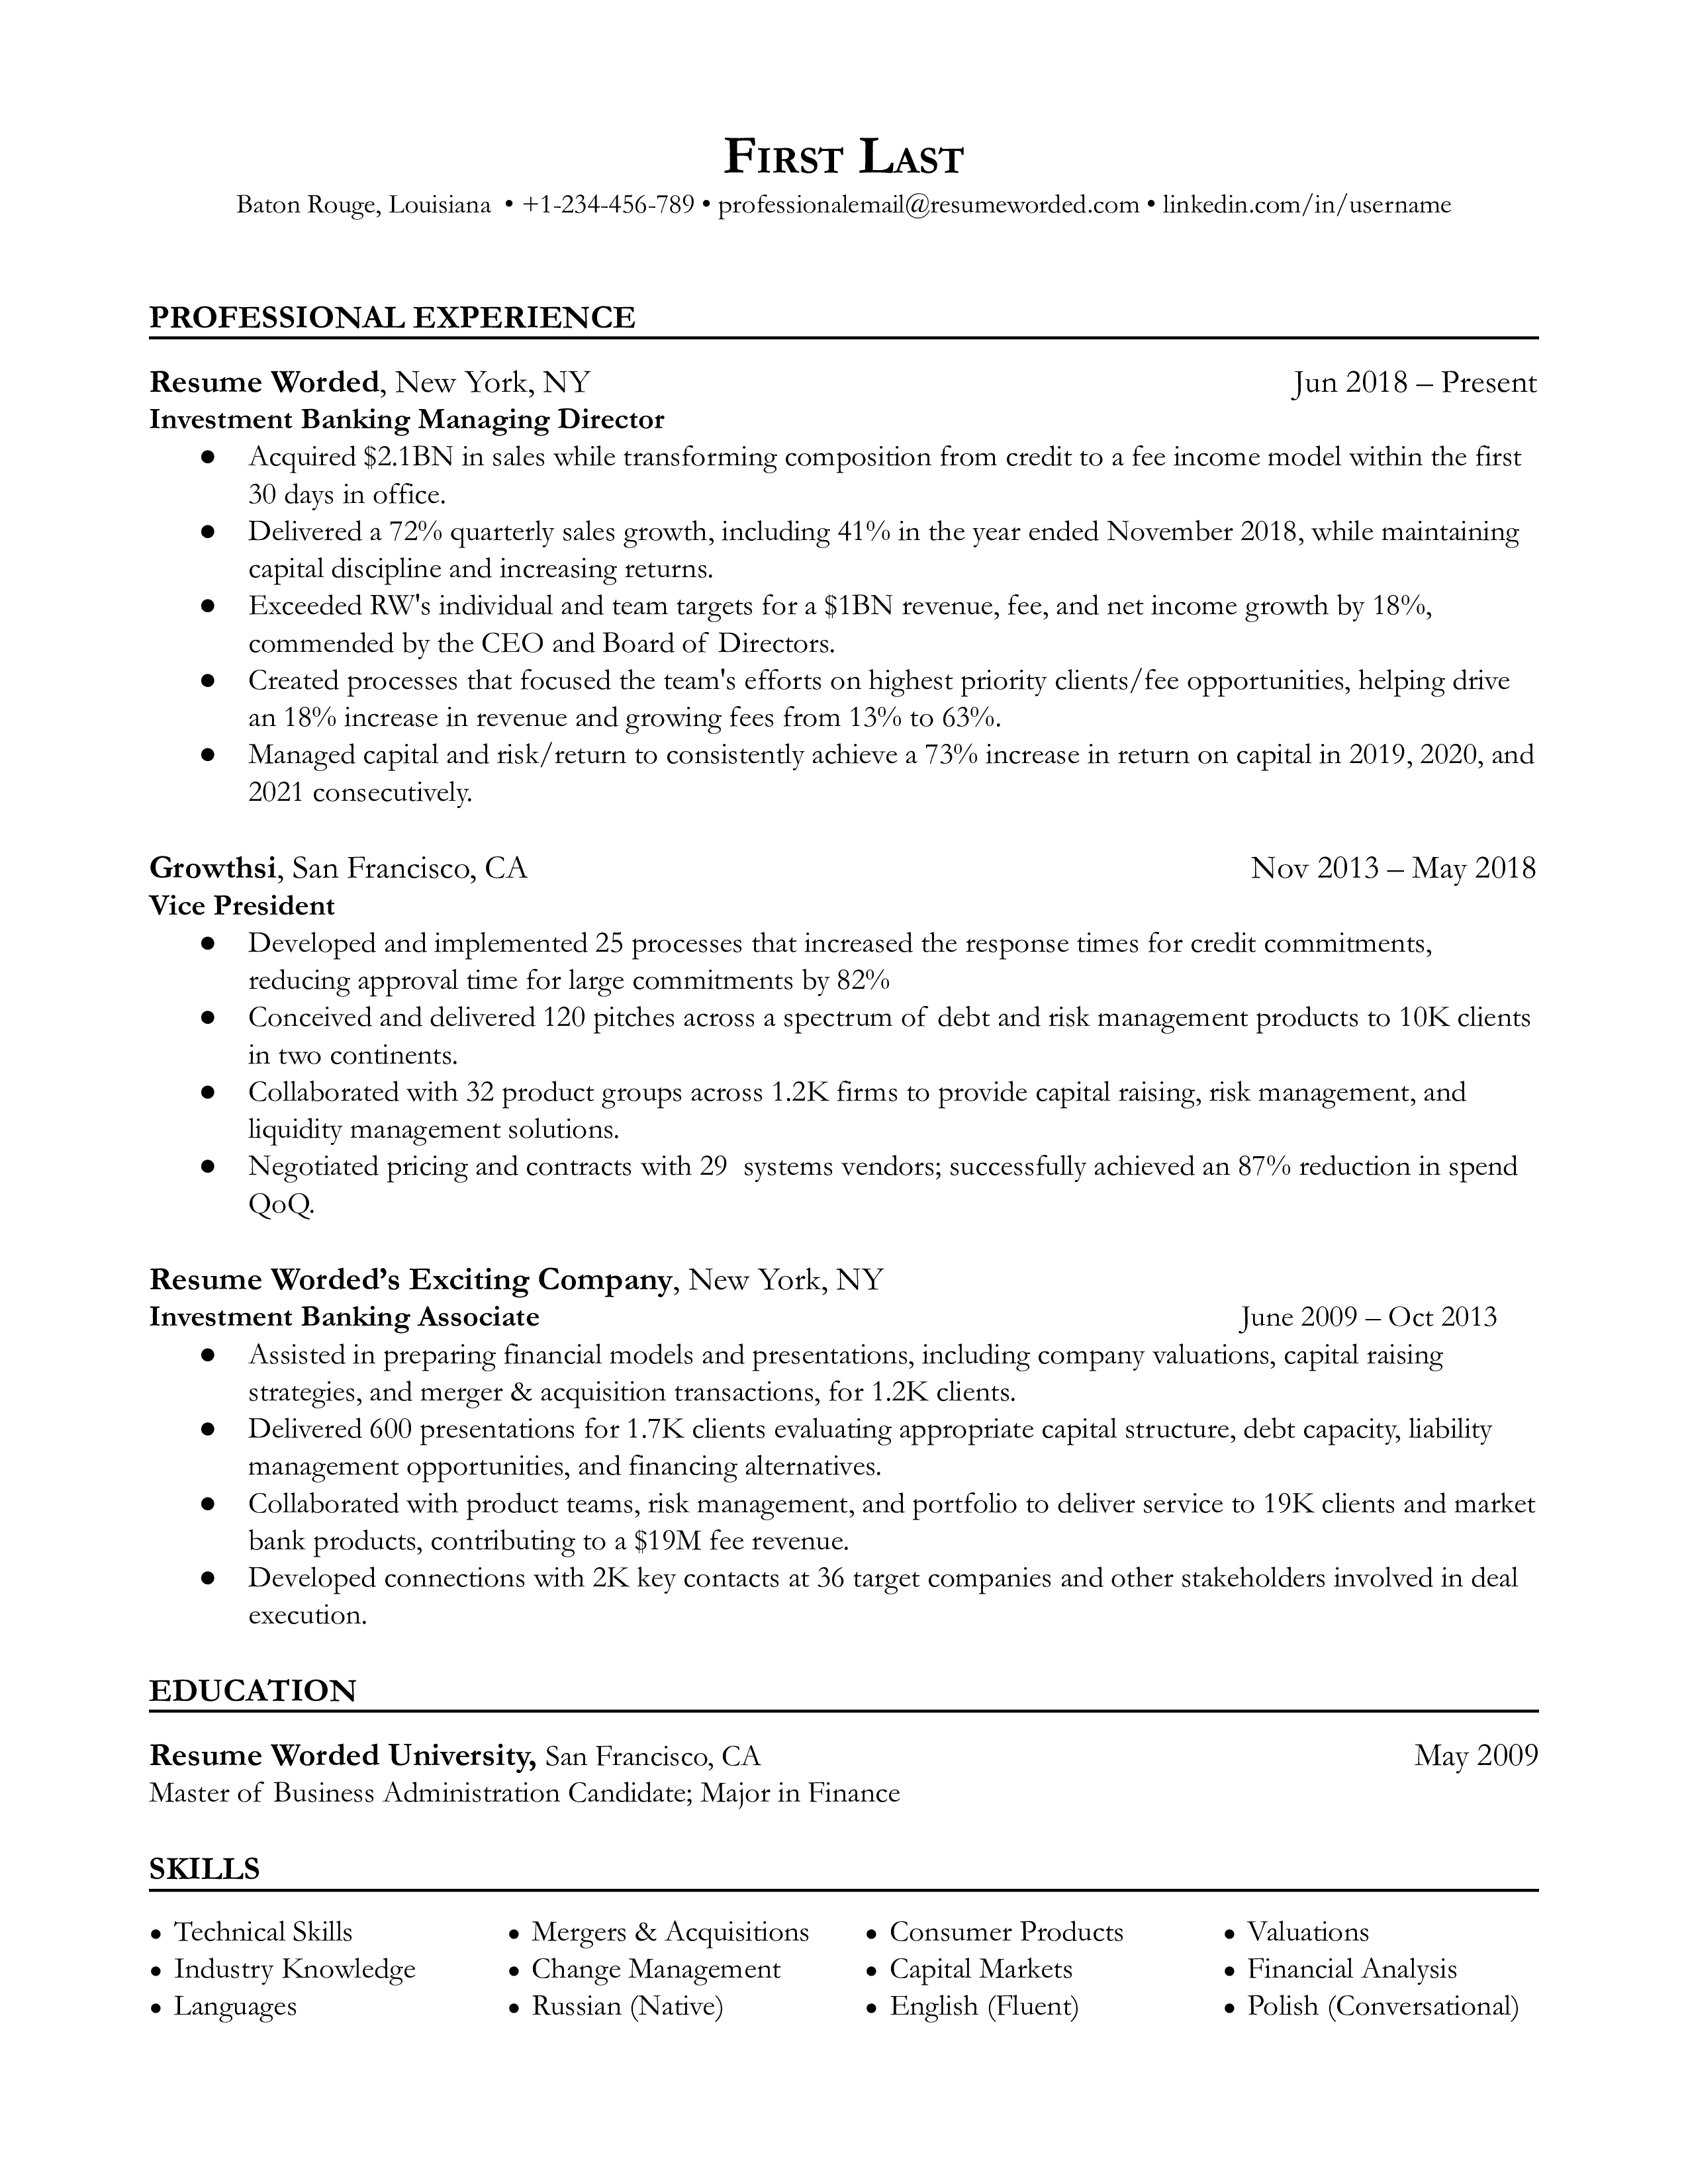 An investment banking managing director resume sample highlighting the applicant’s sales strengths and communication skills.